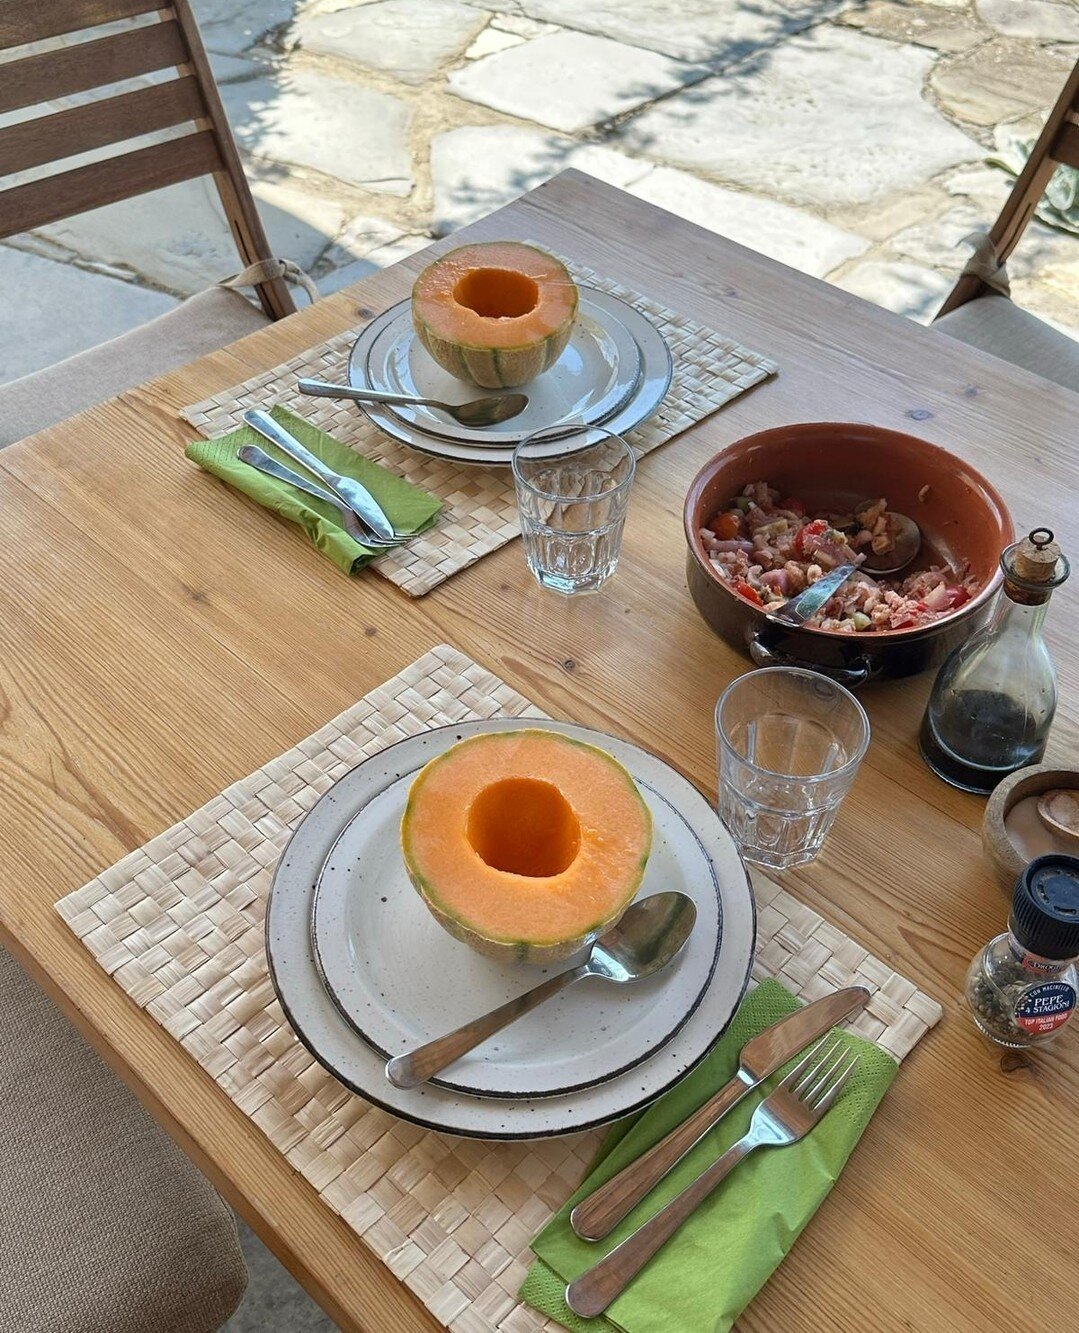 You can enjoy your summer lunches at Torre di Sopra by sitting directly at the large table under the loggia while overlooking the lemon trees in vases on the yard.⁠
⁠
Have you&rsquo;ve already spent some time at Torre di Sopra?⁠
Send us your best pic